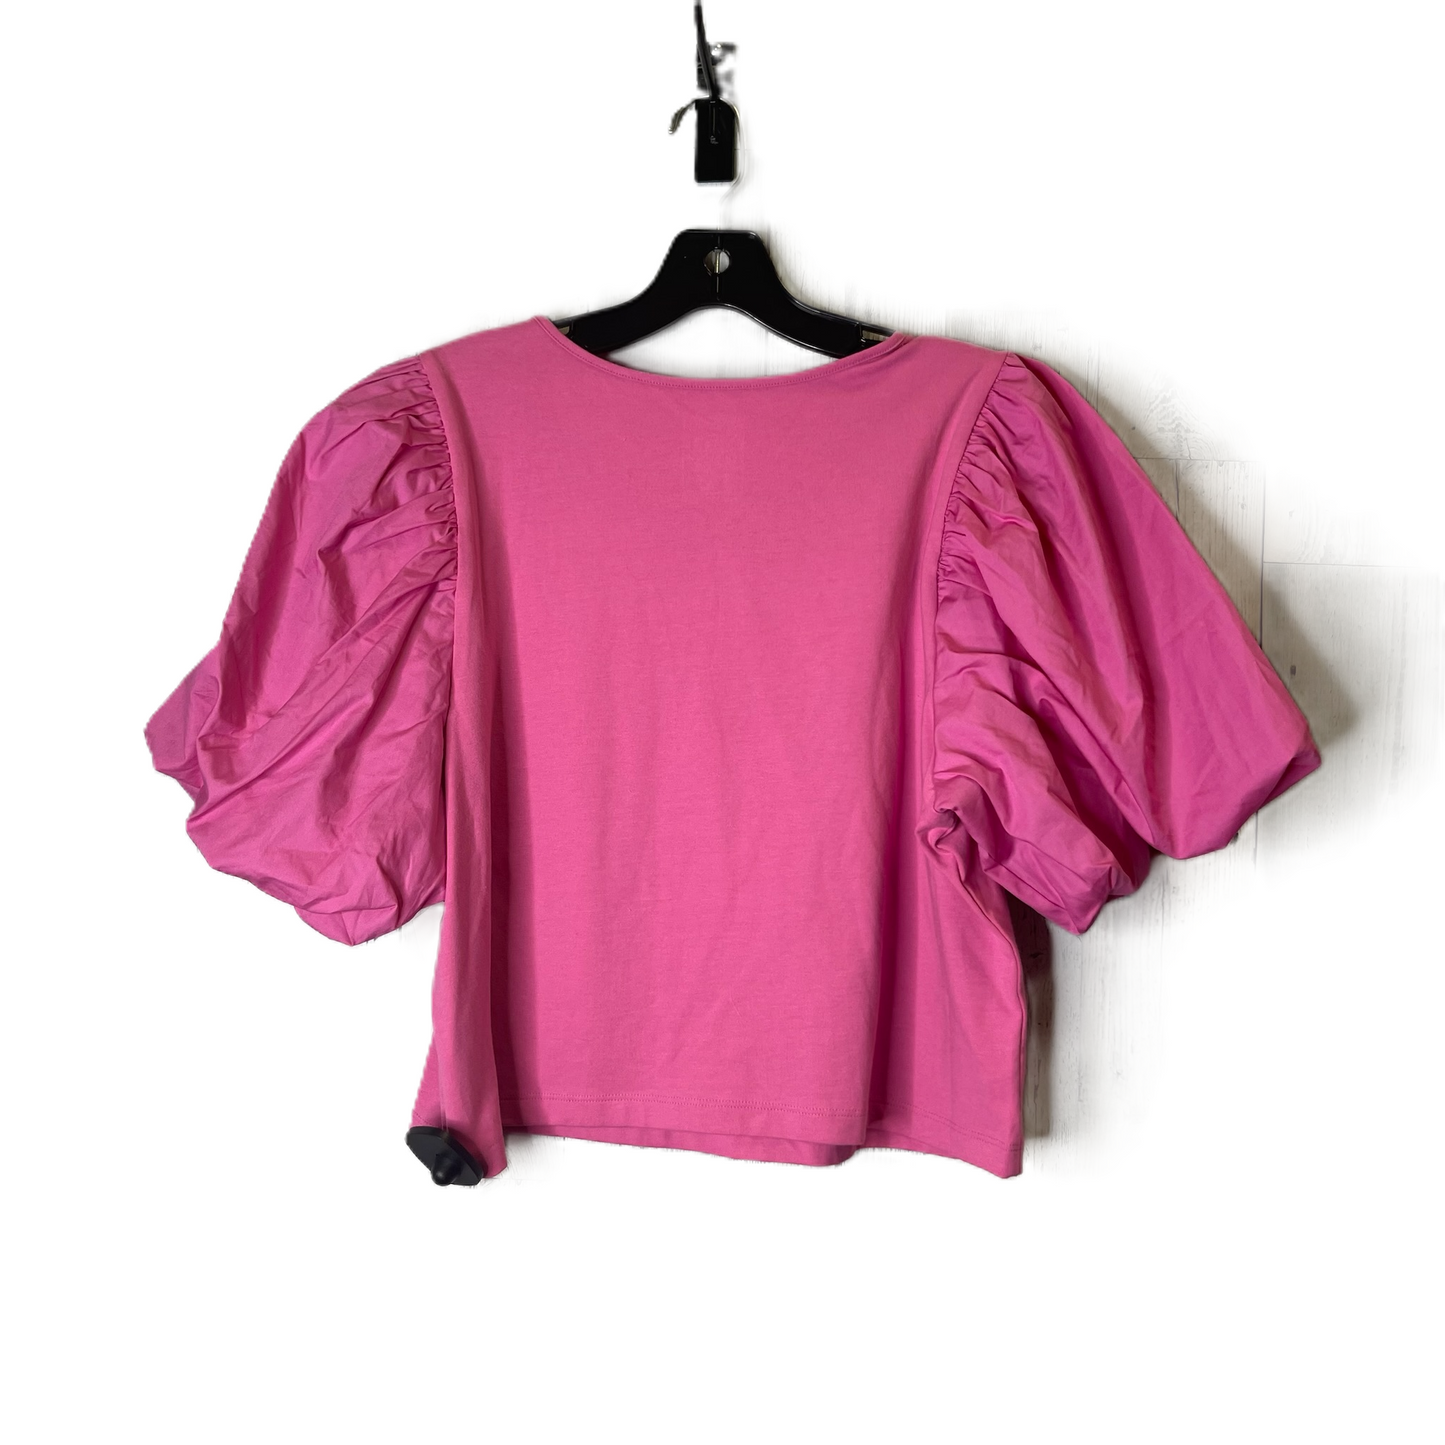 Pink Top Short Sleeve By A New Day, Size: L